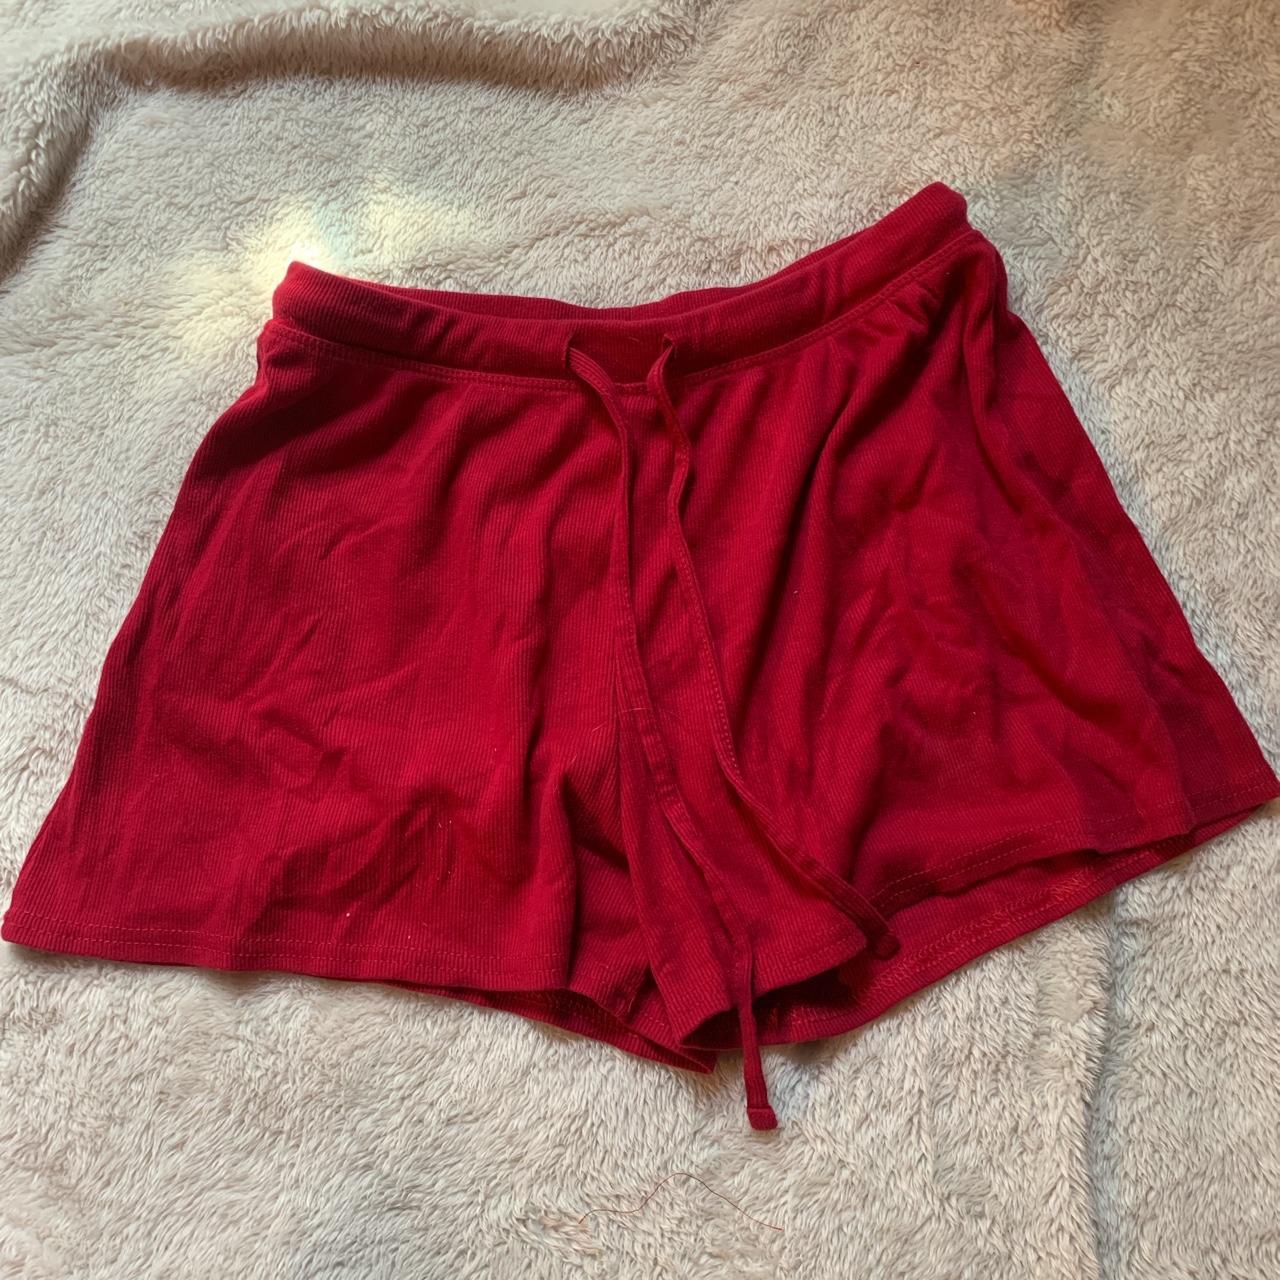 Red shorts, tie can be adjusted, no pockets,... - Depop